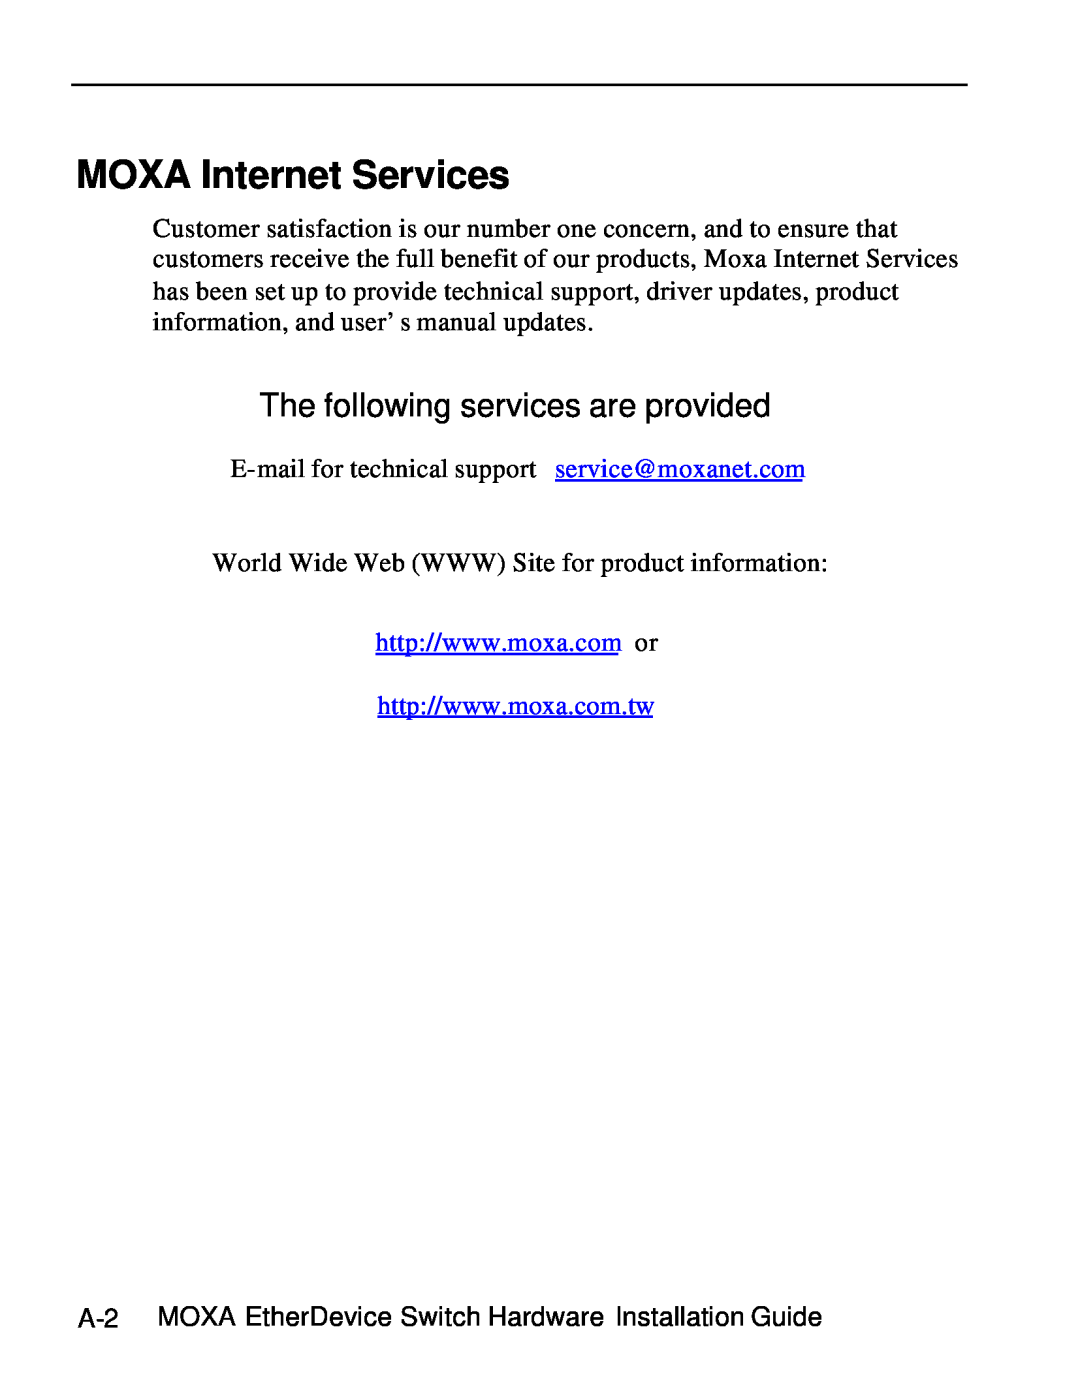 Moxa Technologies EDS-508 manual MOXA Internet Services, The following services are provided 